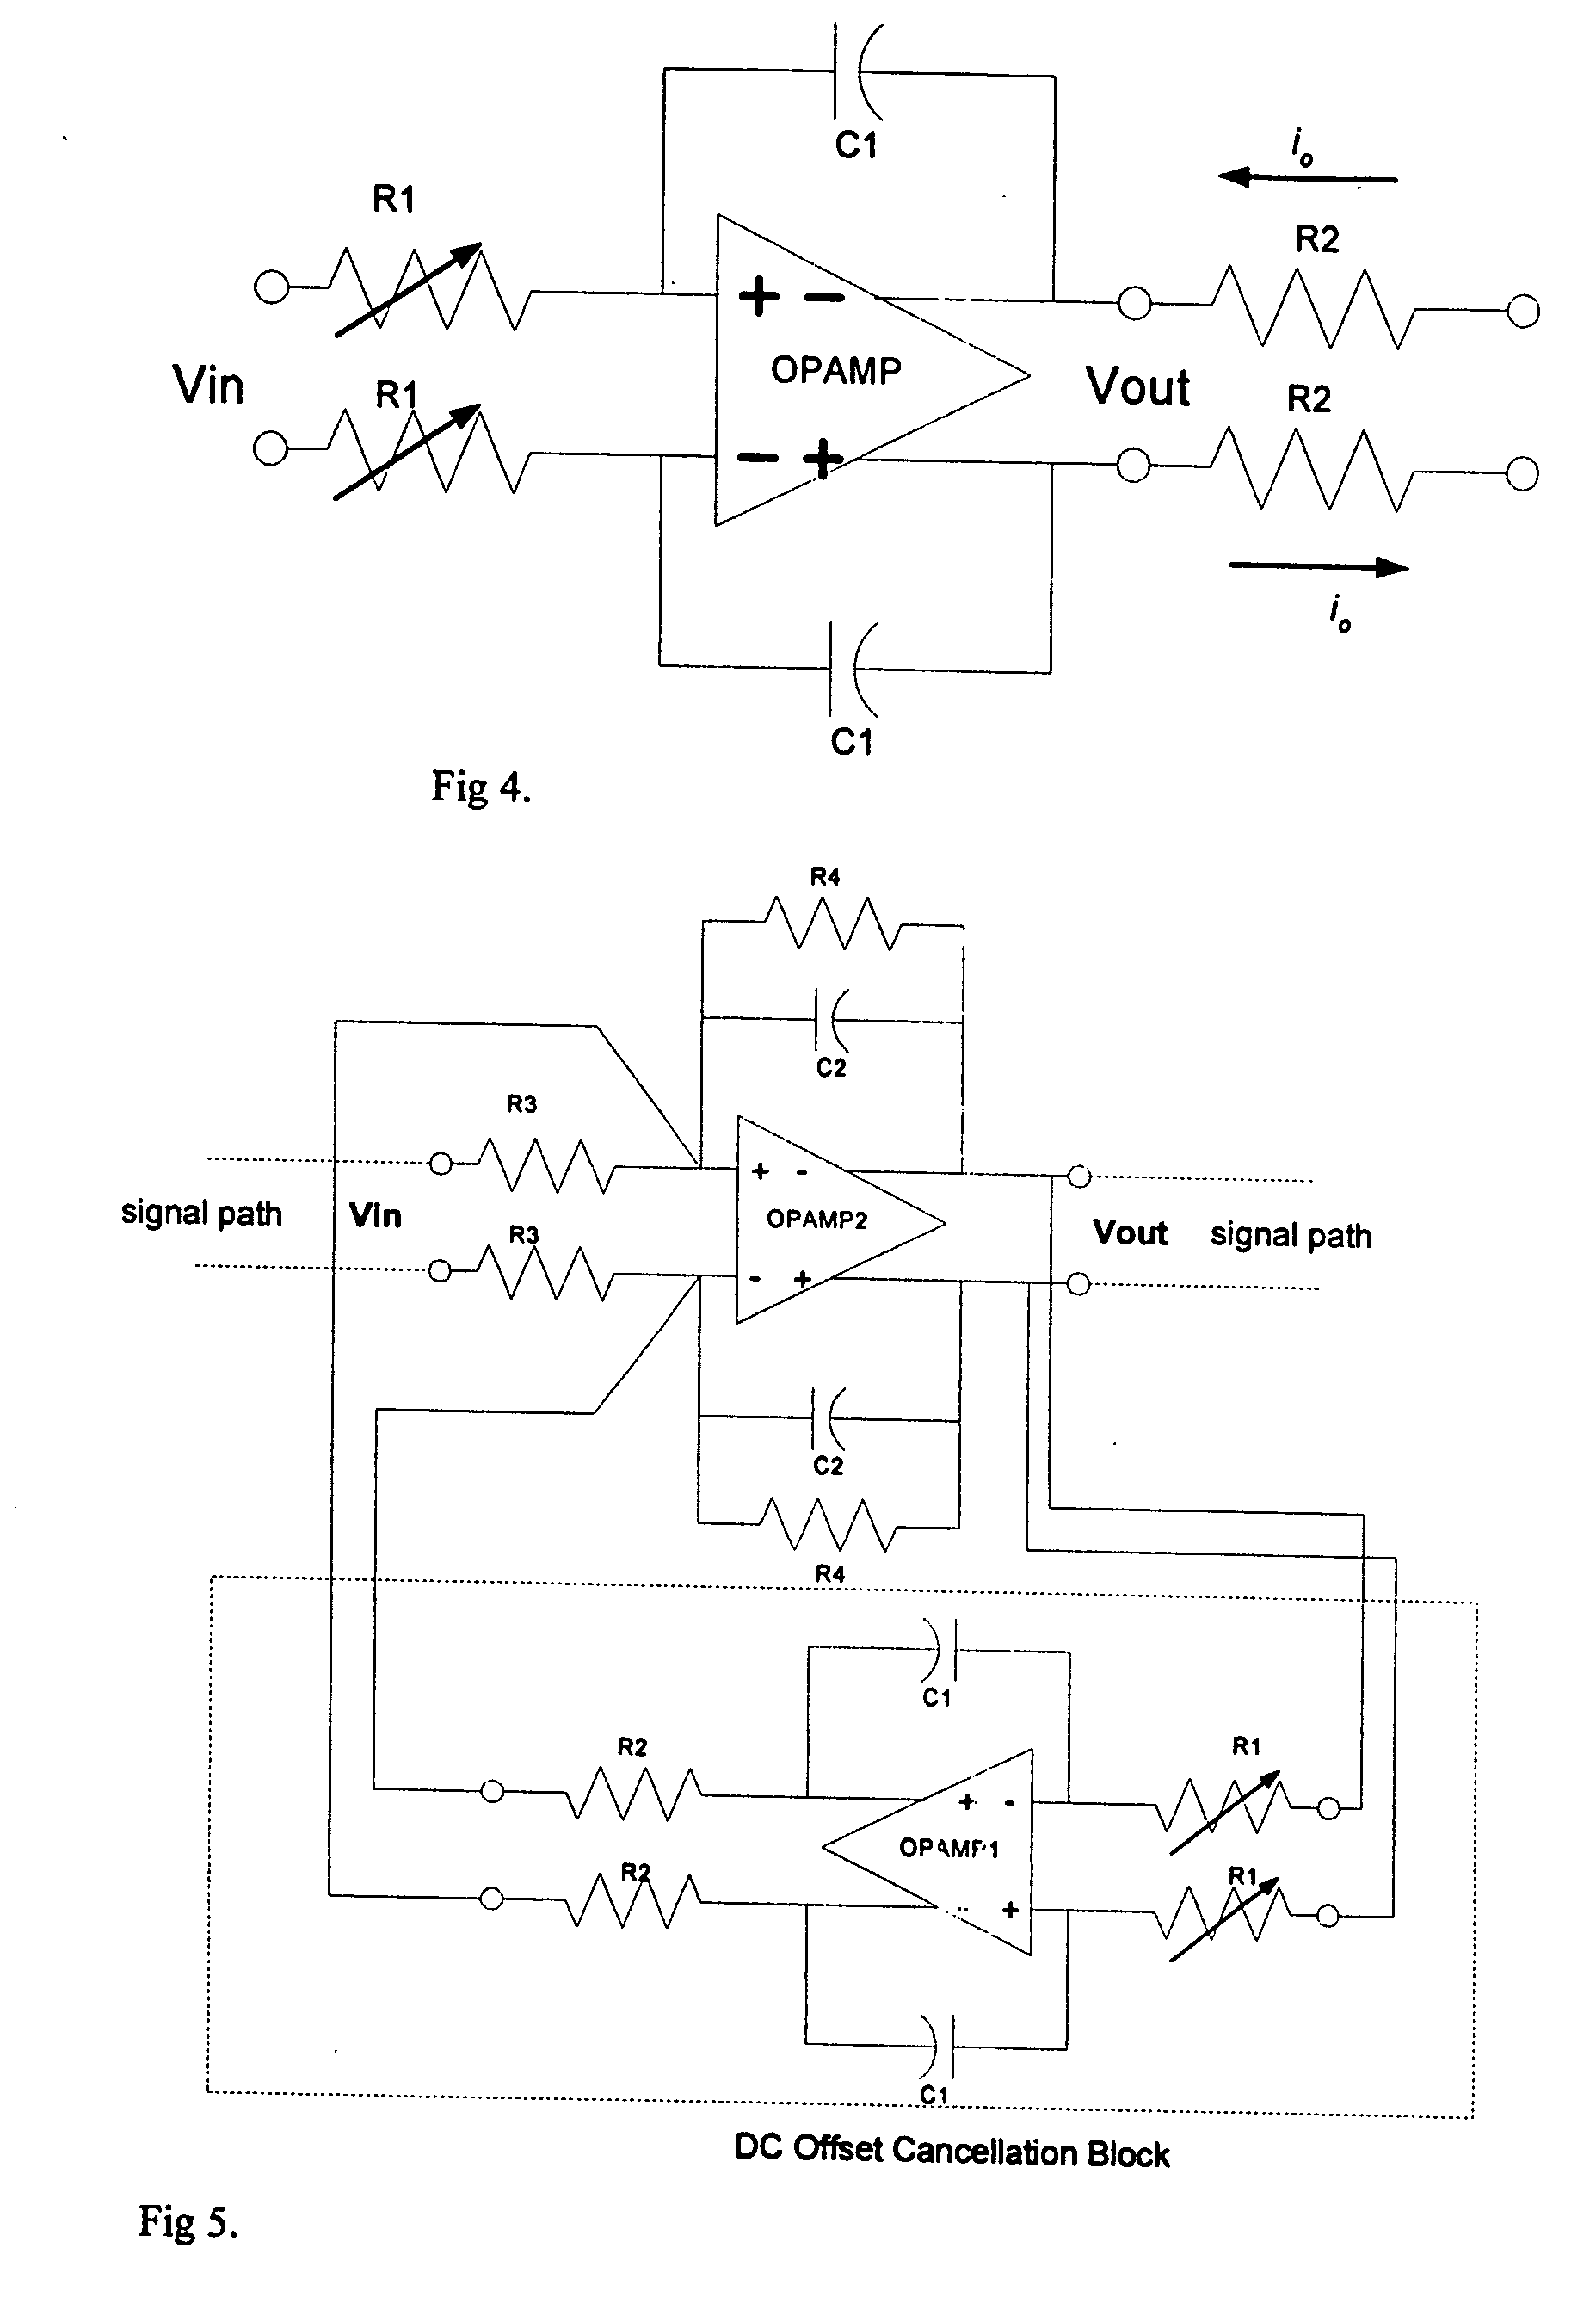 DC offset cancellation in a direct-conversion receiver